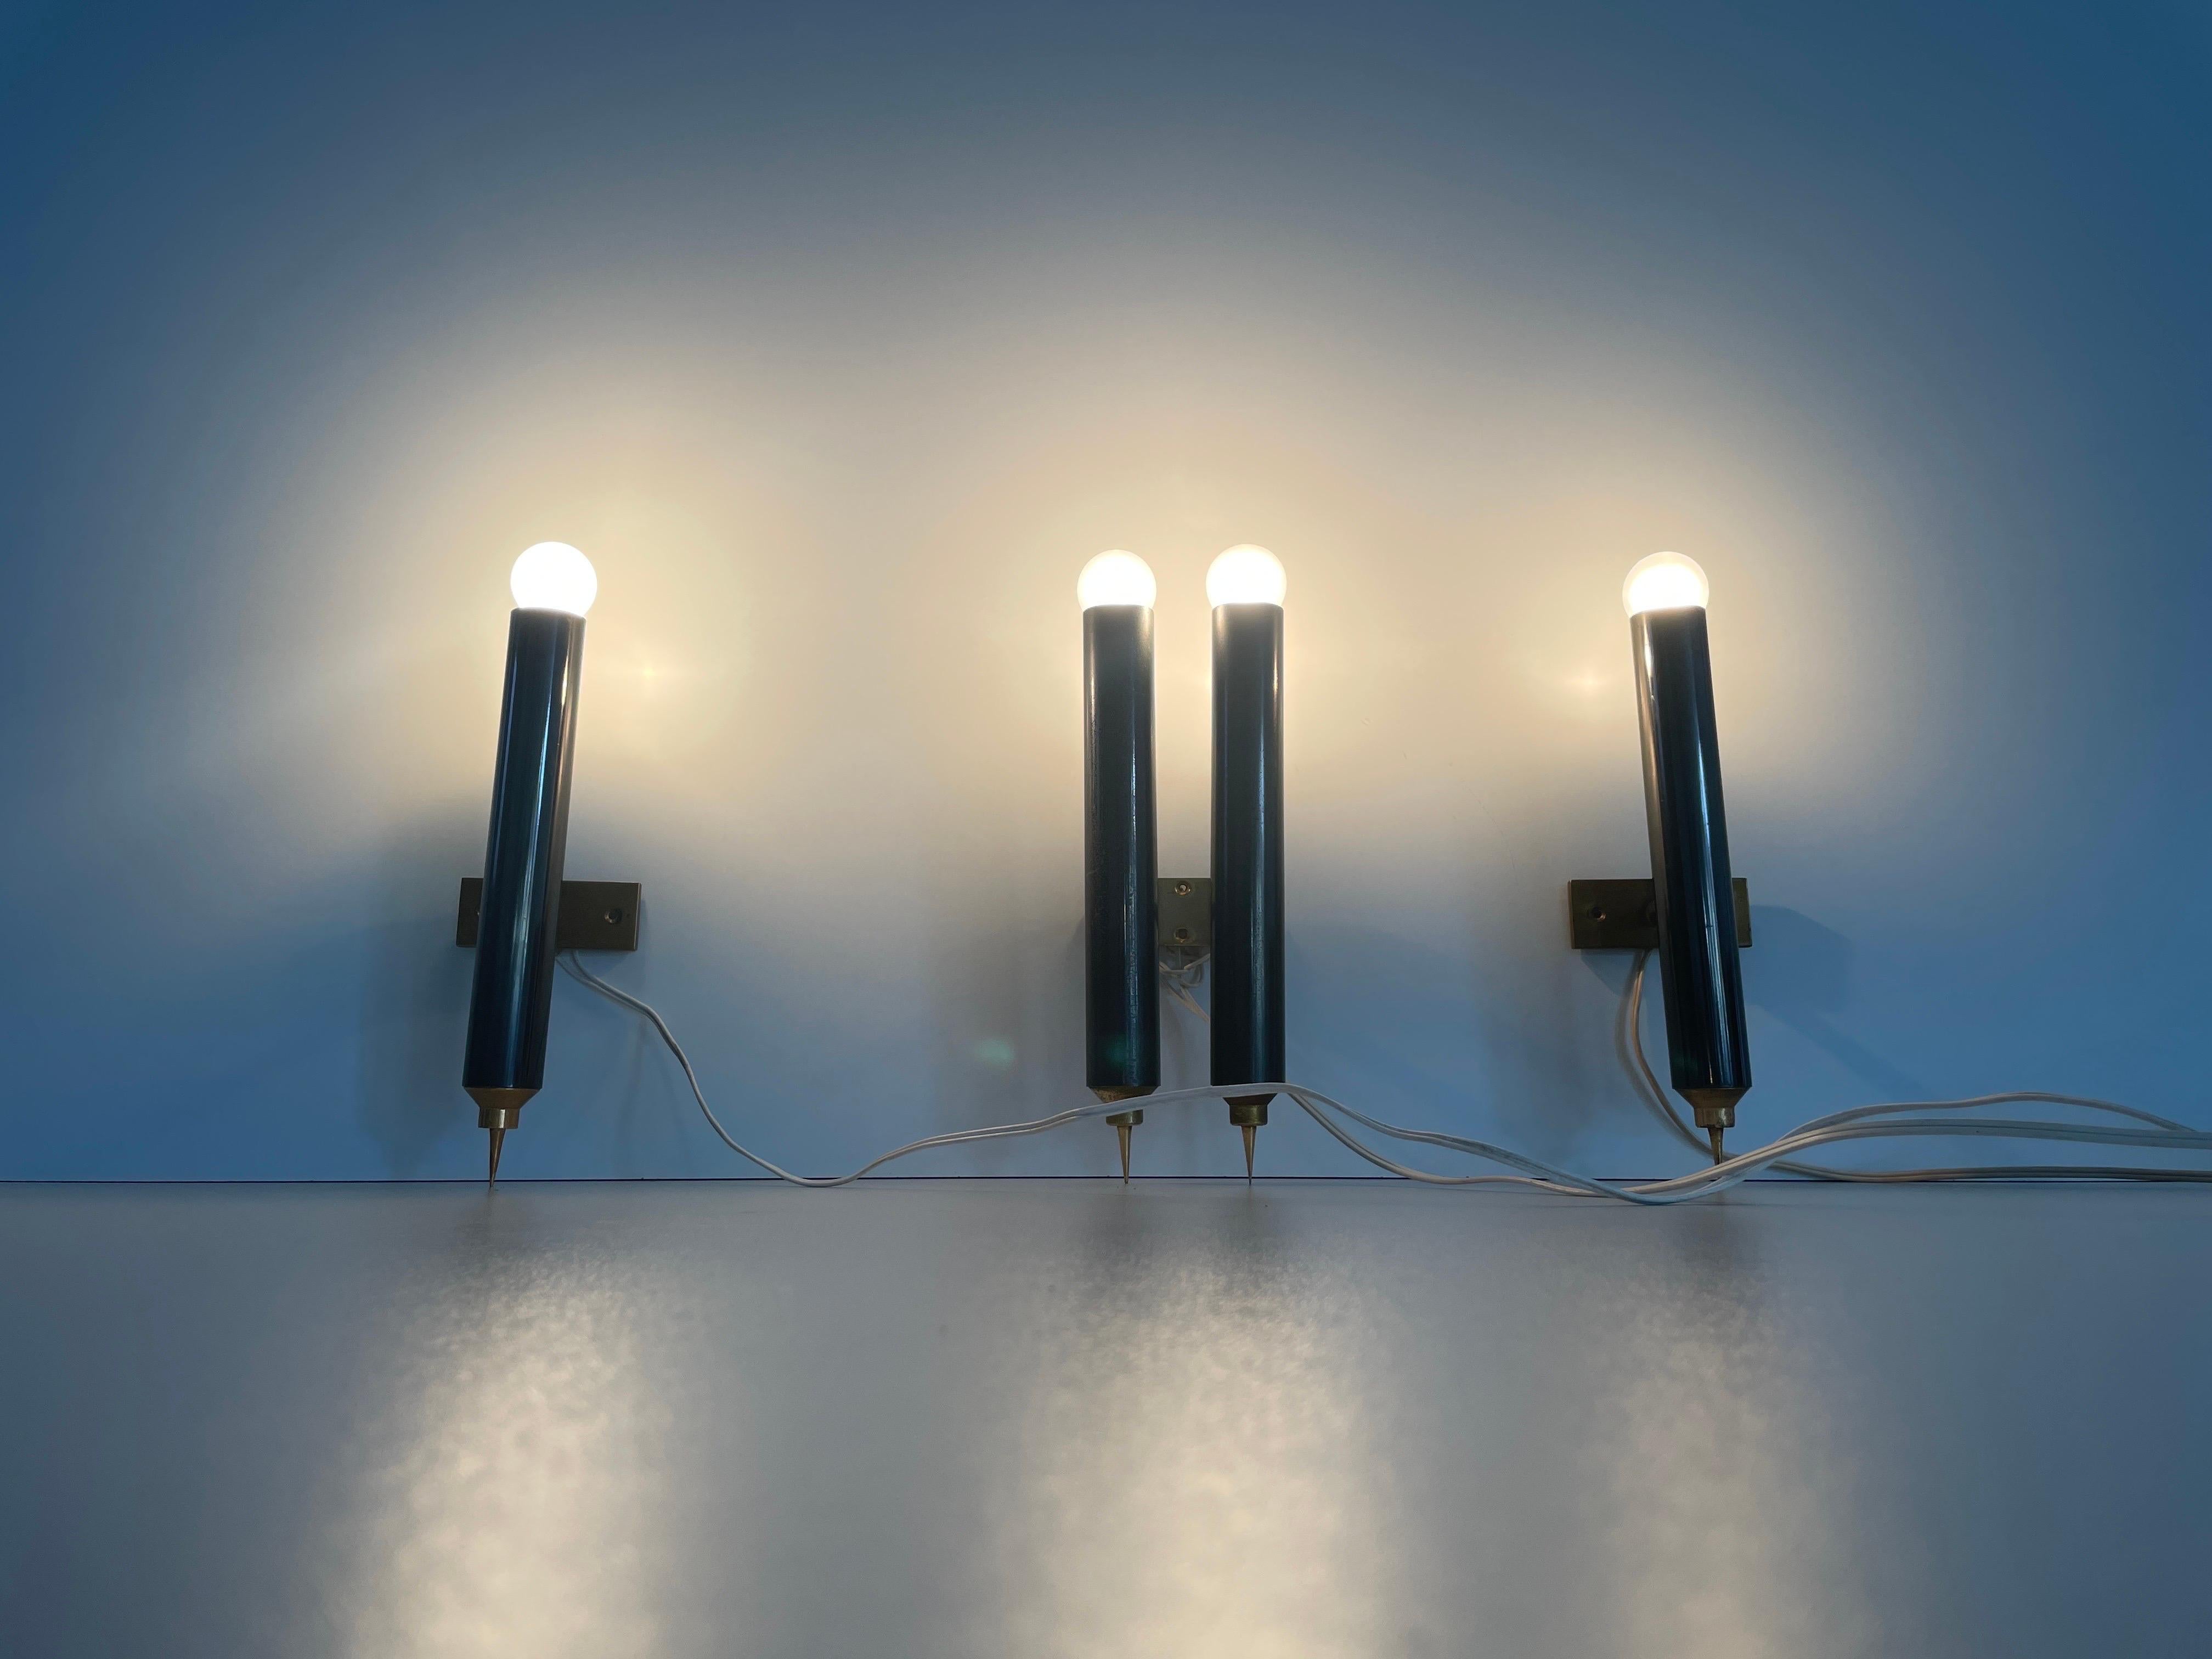 Set of 3 Modernist Tube Design Wall Sconces, 1960s, Italy For Sale 4